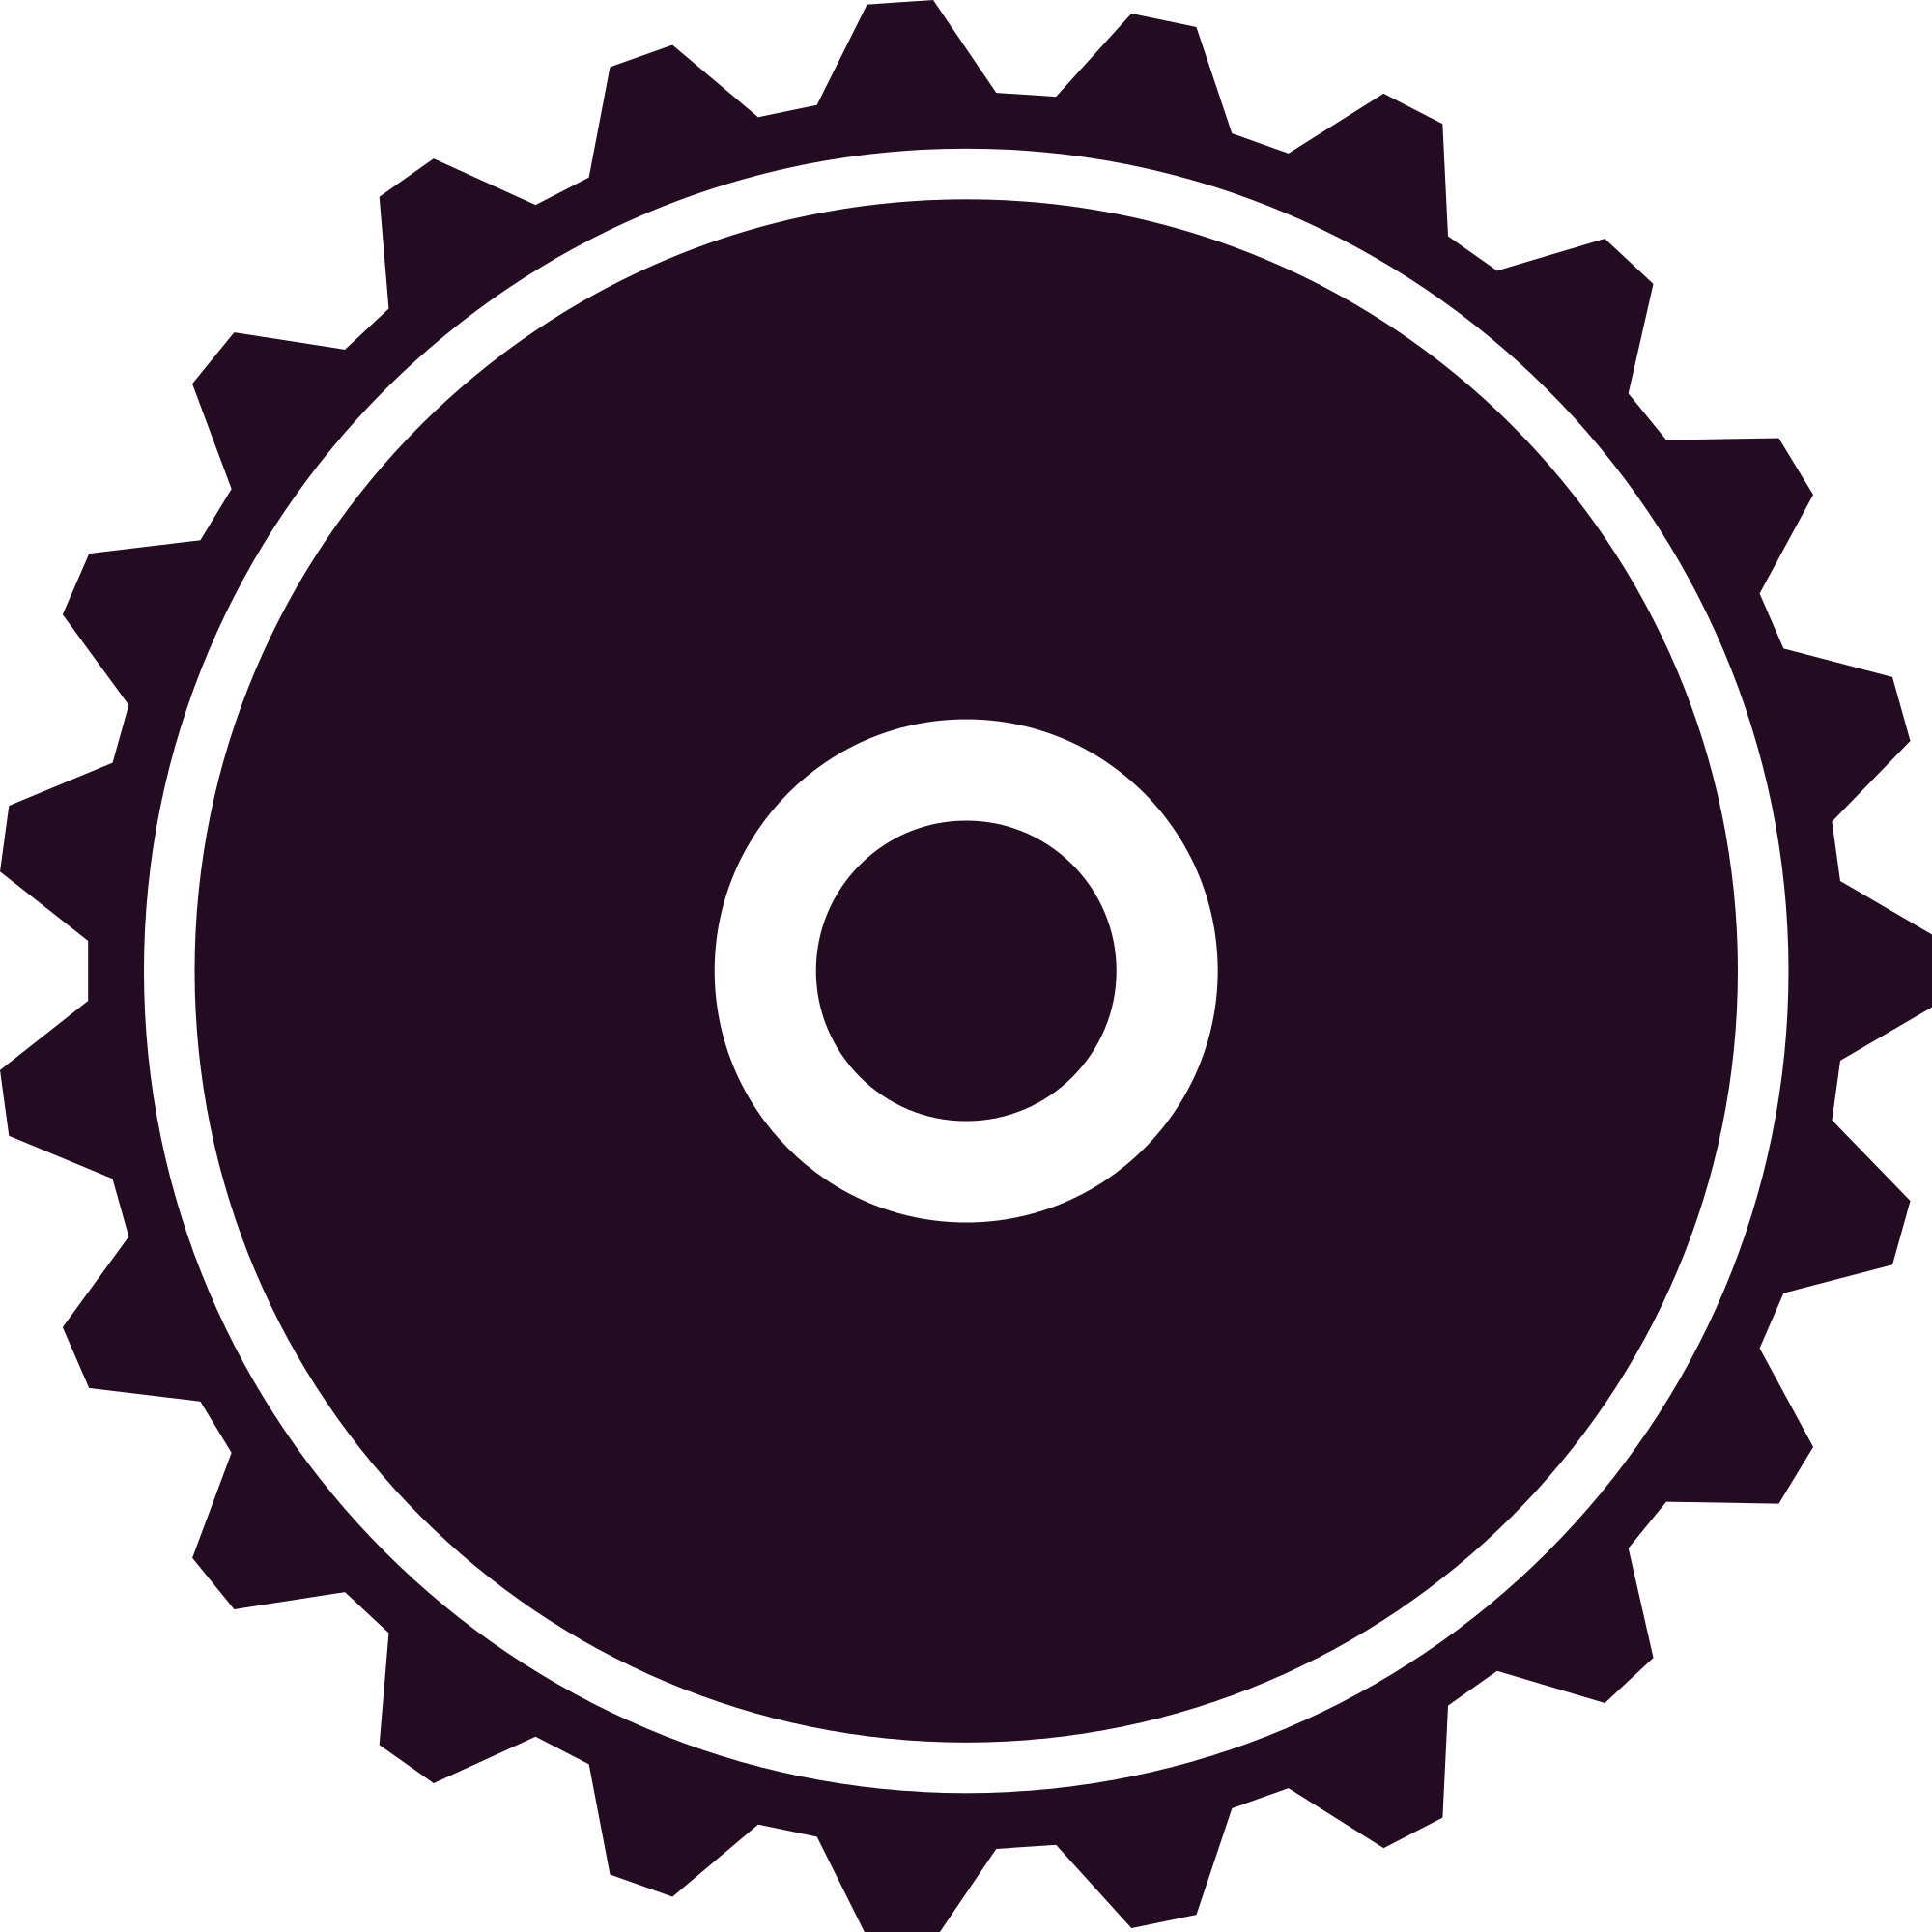 Gear Logo - gear icon png download - 981*978 - Free Transparent Gear ...